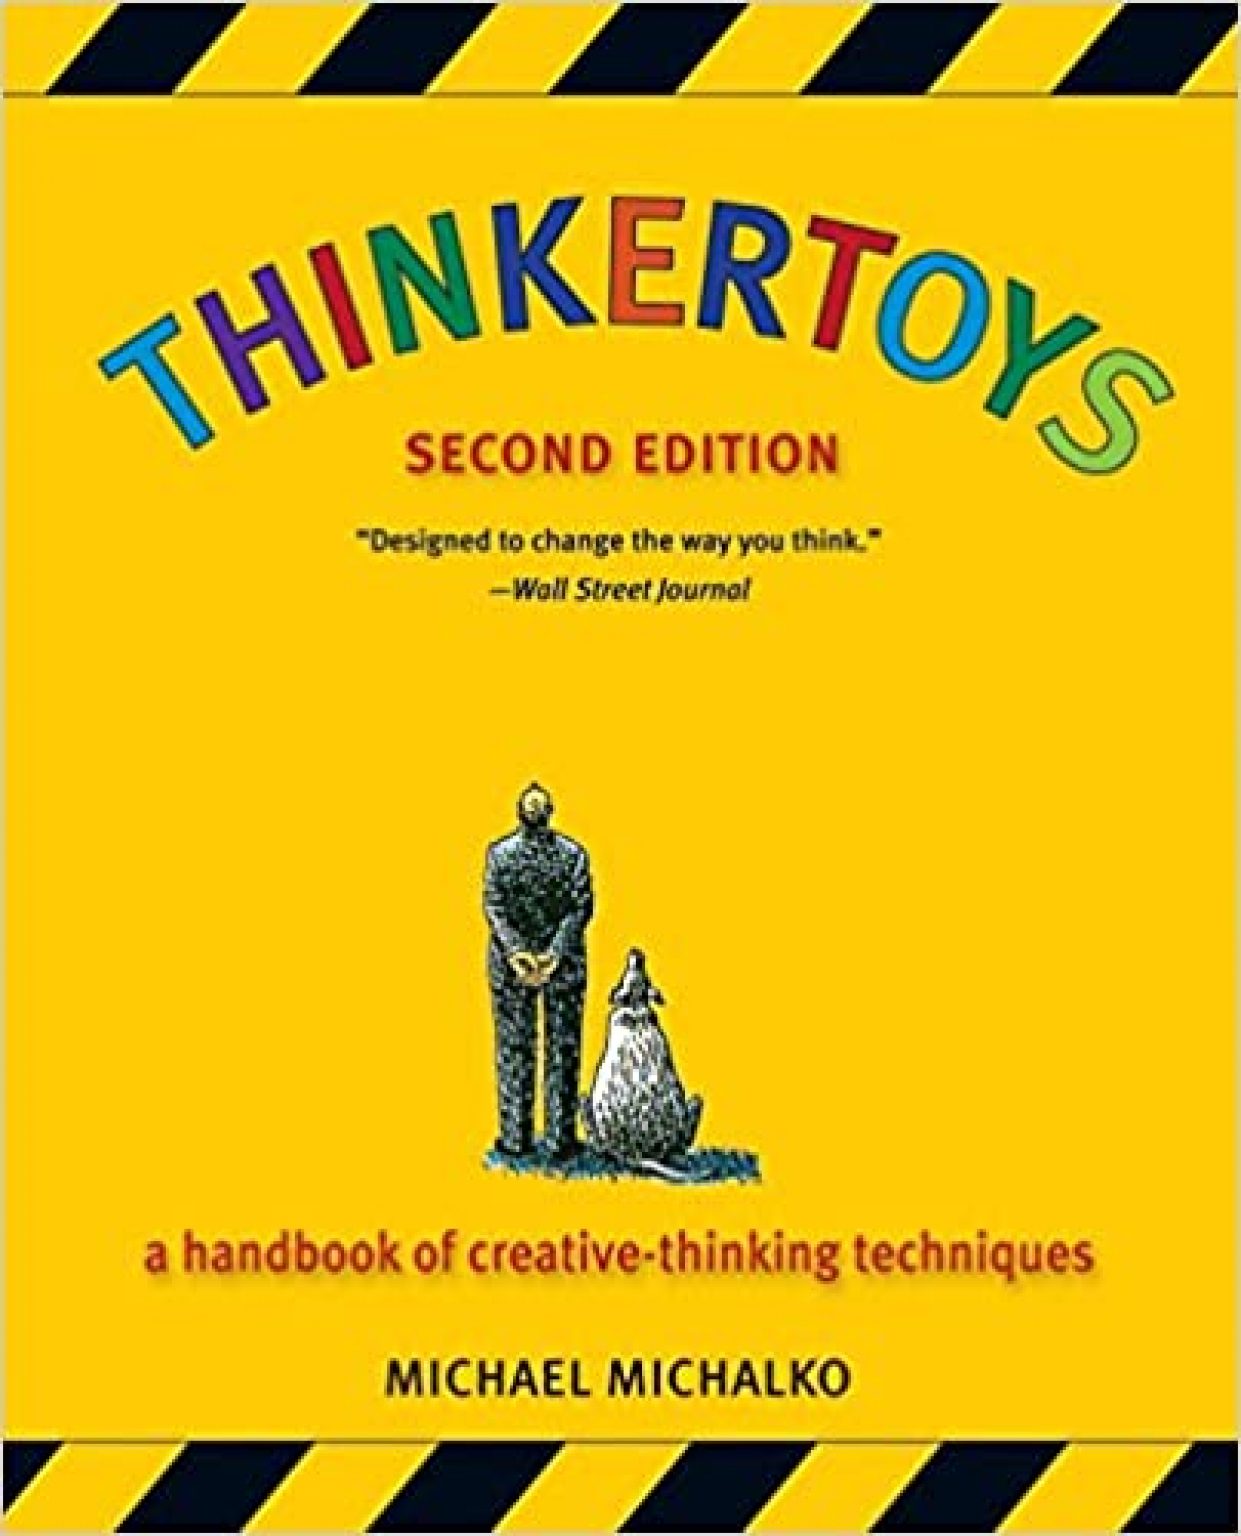 5 Best Books for Creative Thinking - Gkseries Recommended Books